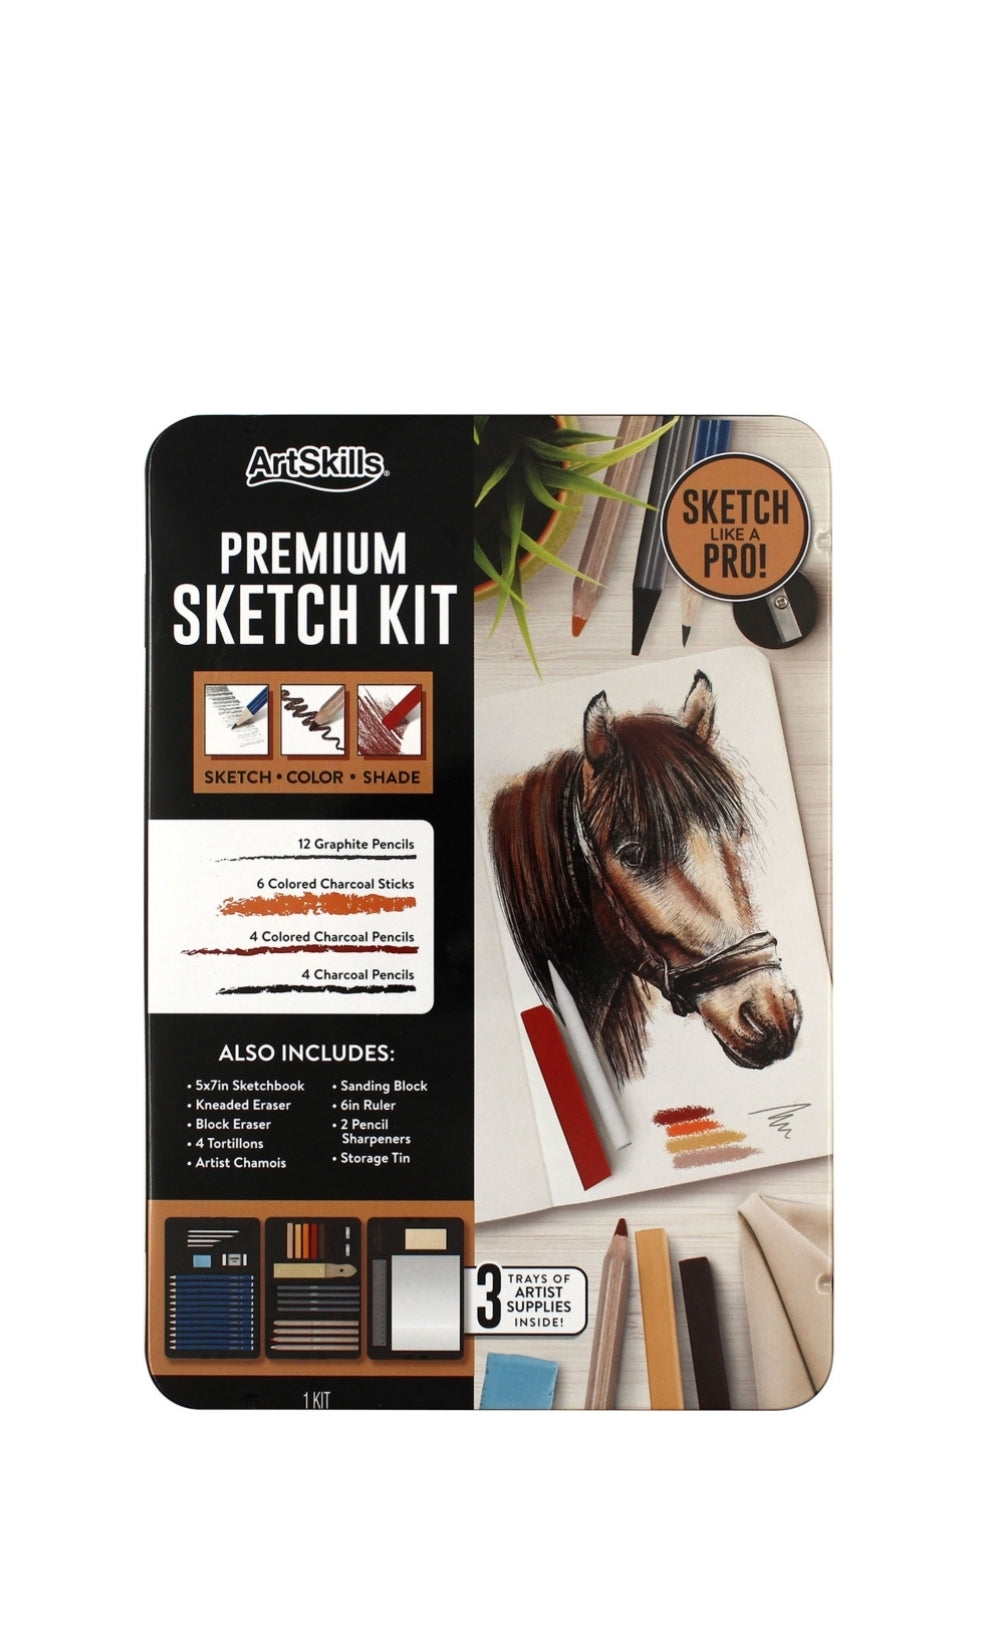 Sketch Pencils Set with Sketchbook 41-Piece Professional Drawing